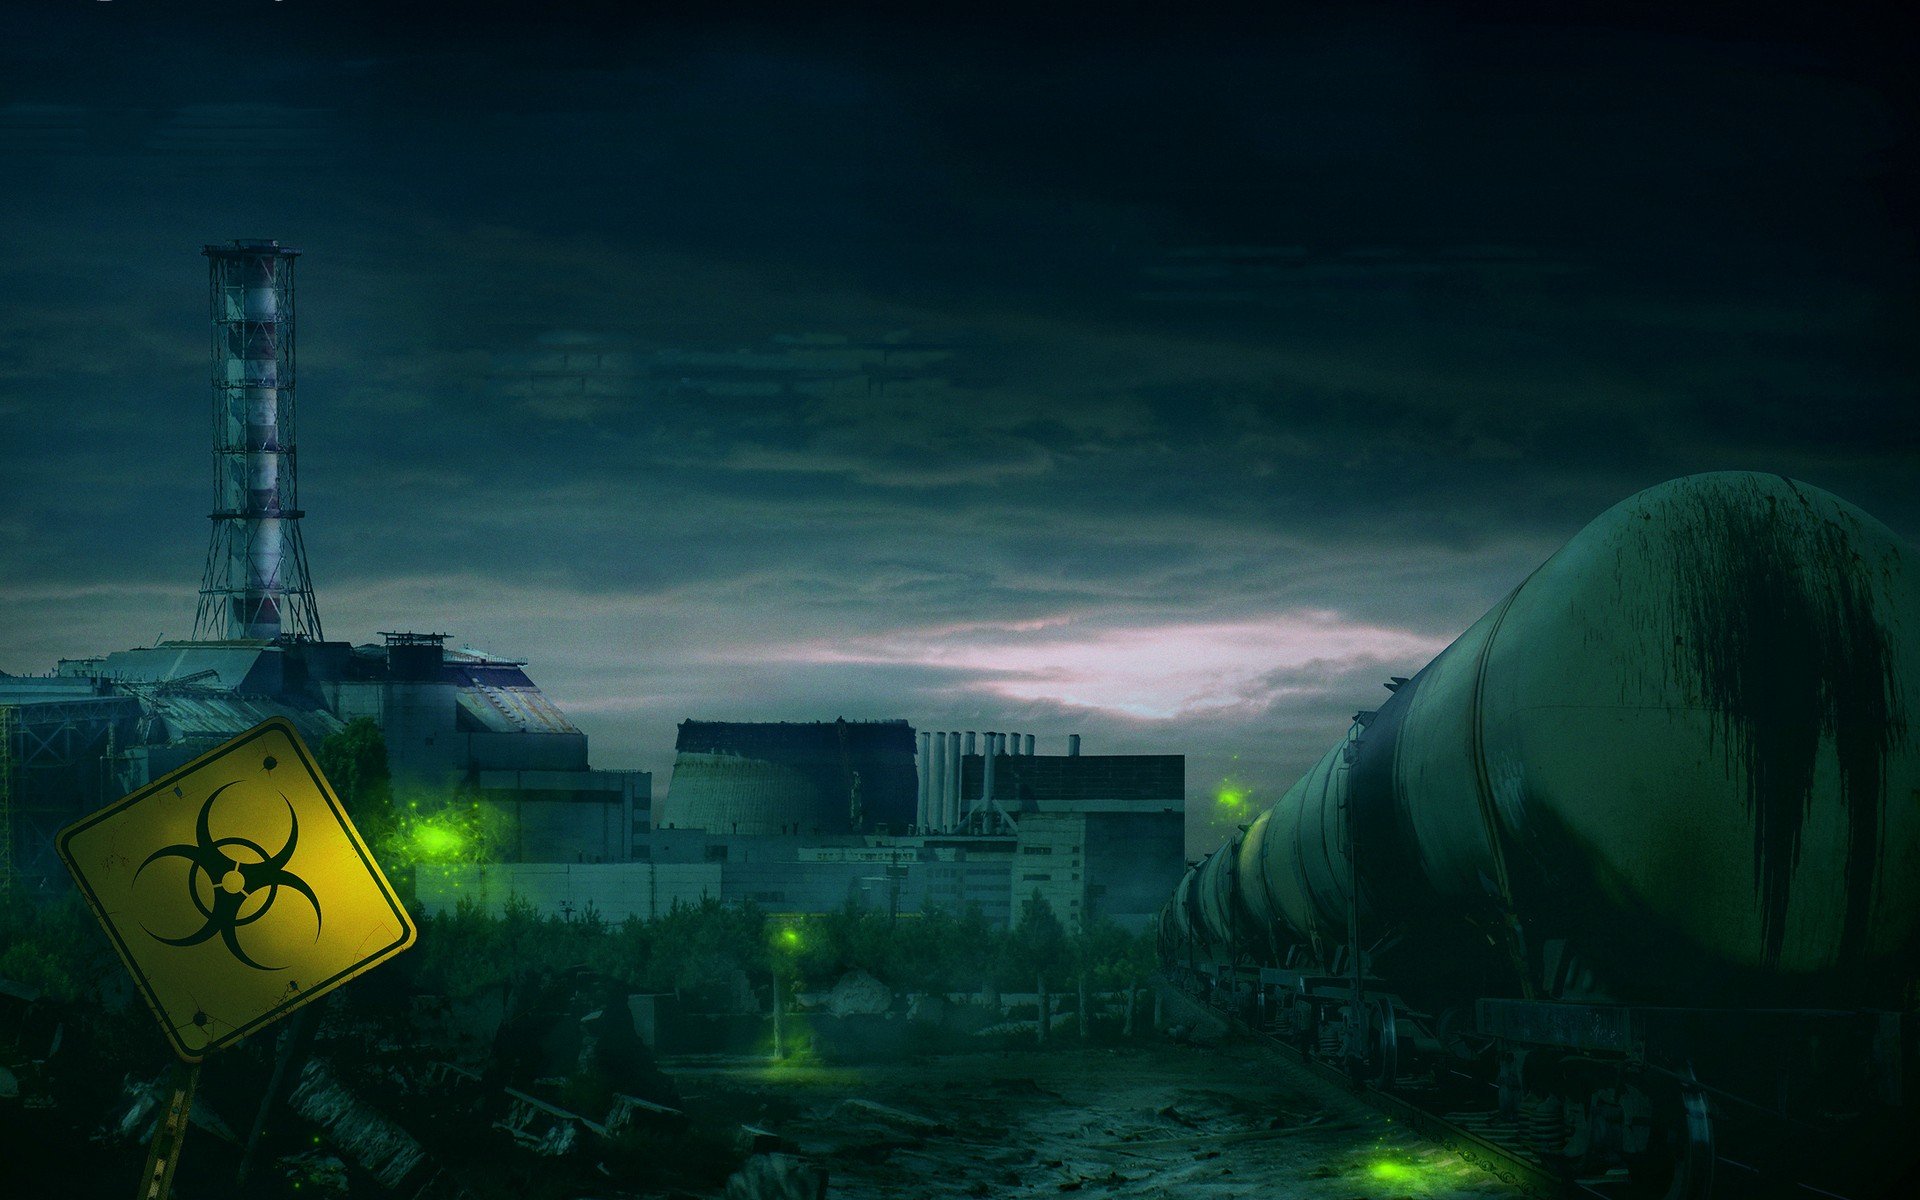 Nuclear chernobyl post apocalyptic wallpaper 1920x1200 17438